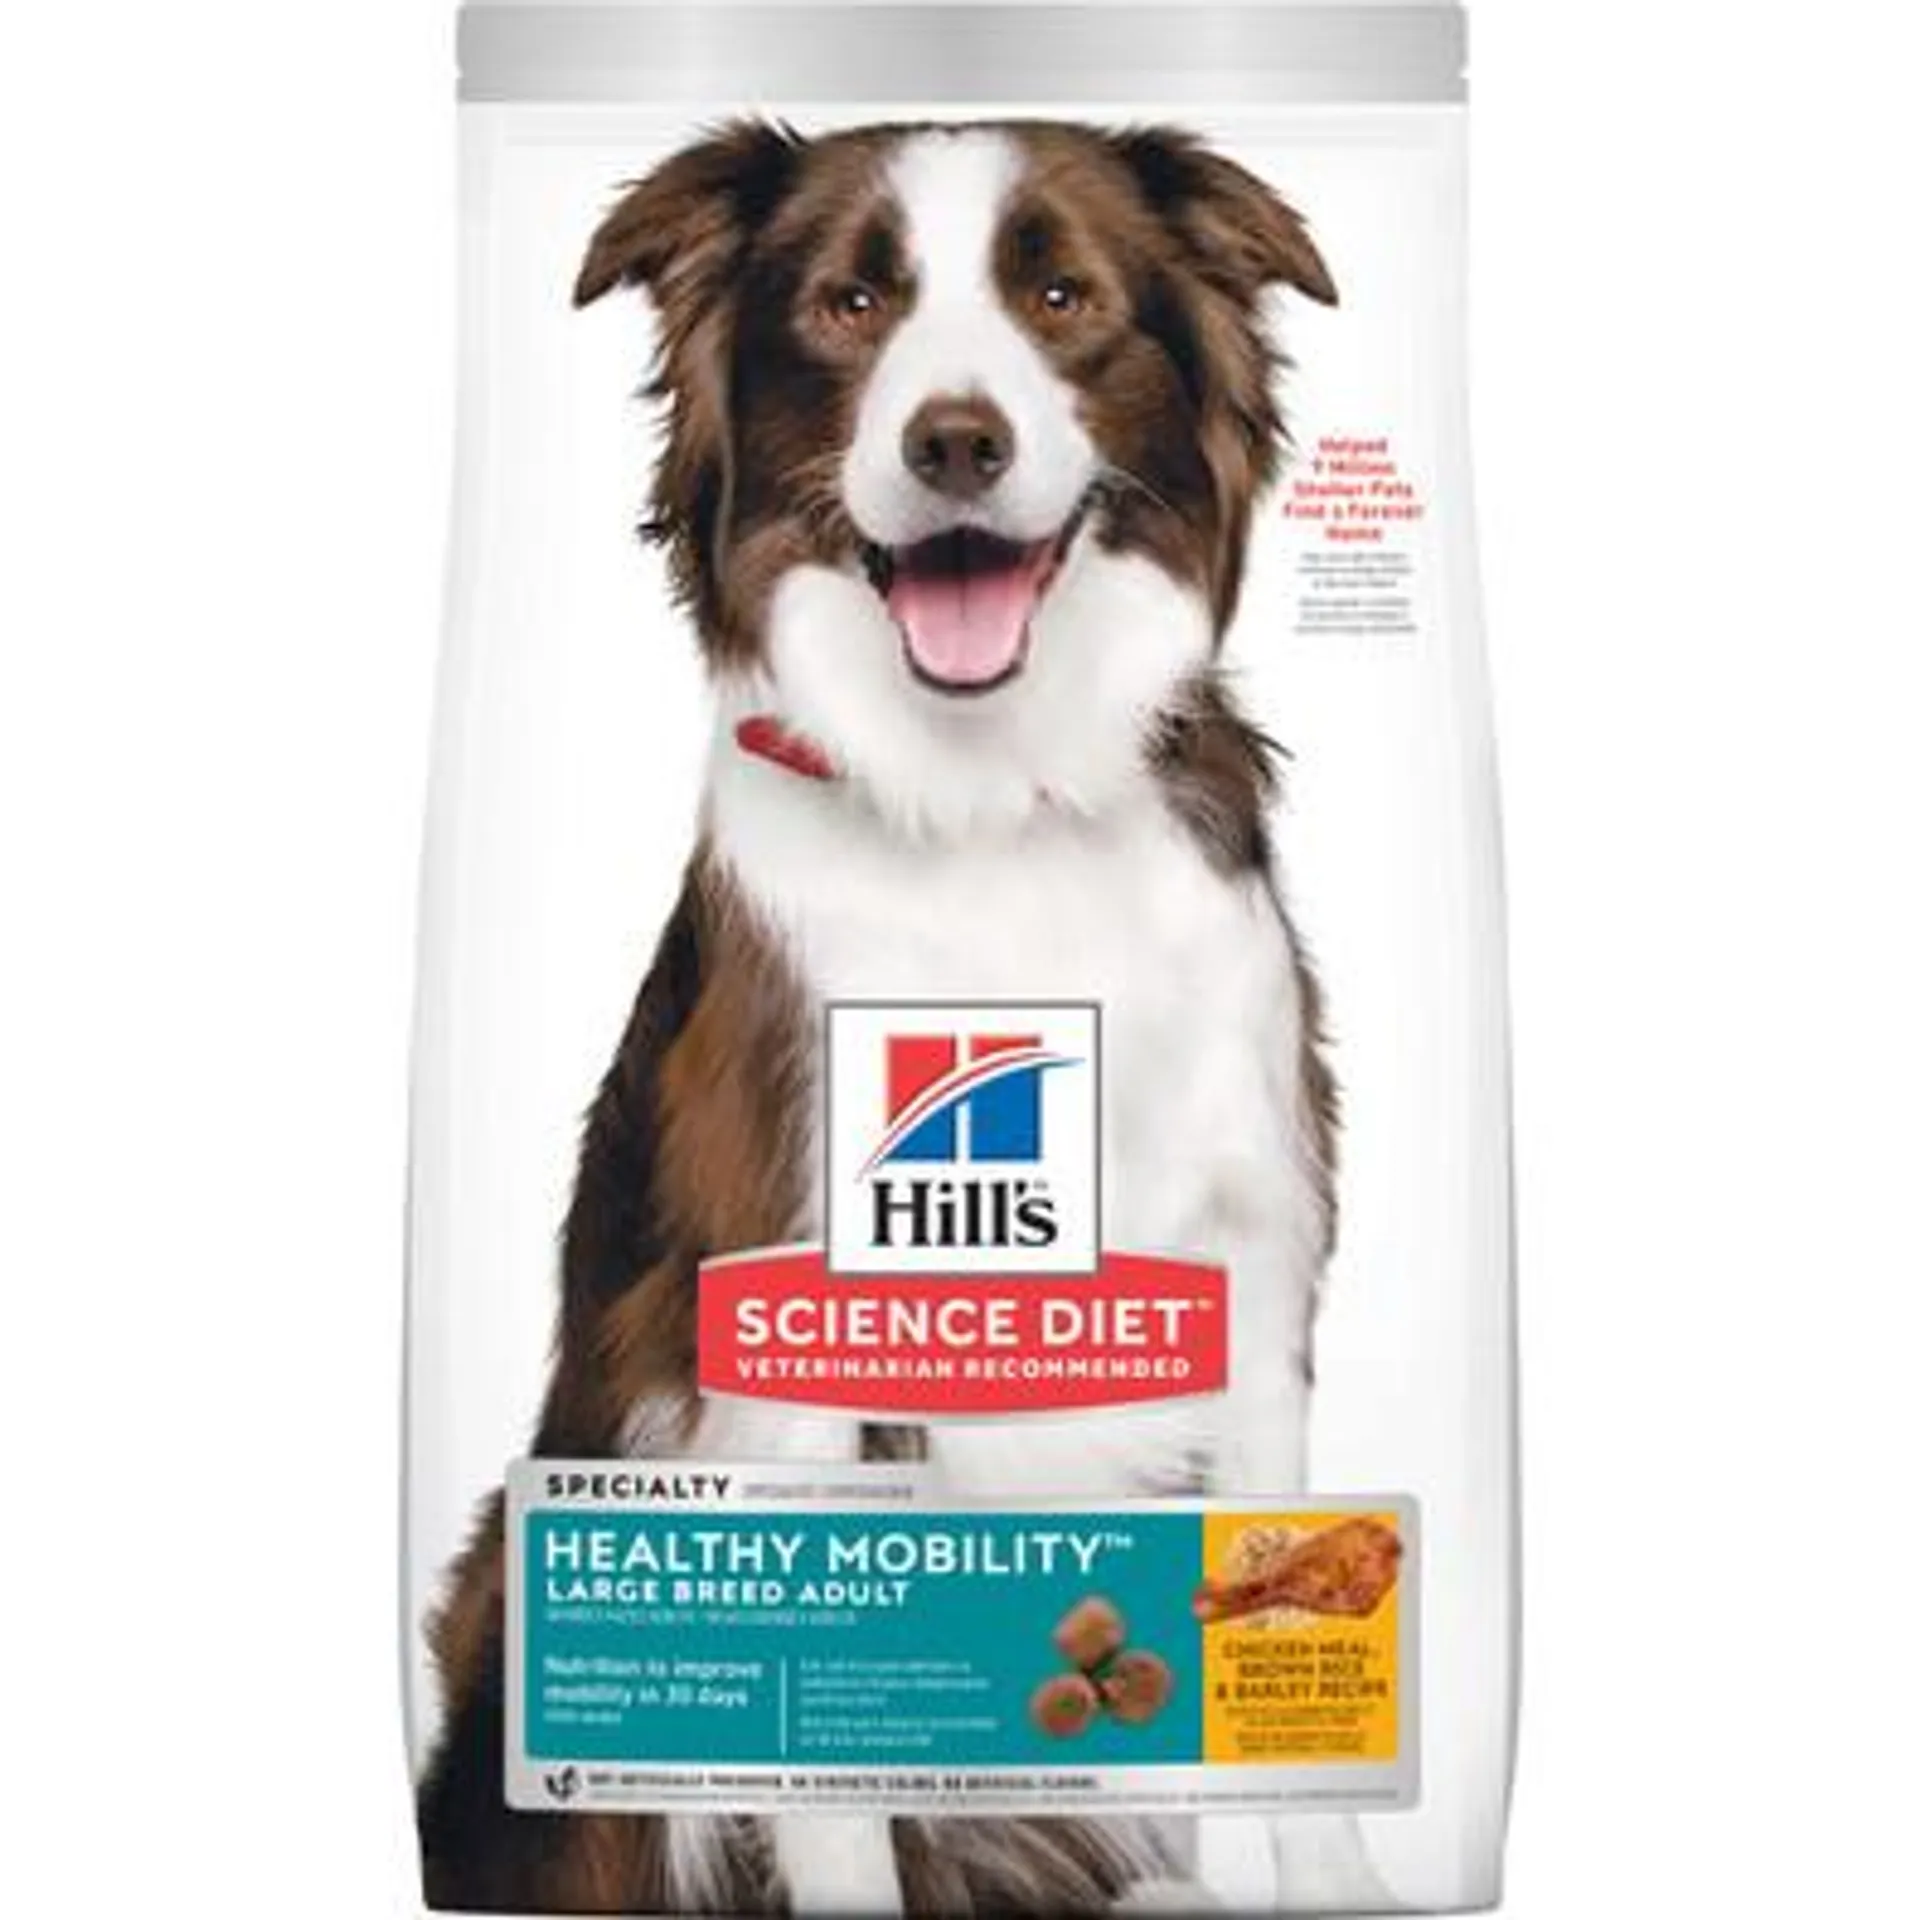 Hill's Science Diet Healthy Mobility Large Breed Adult Dry Dog Food